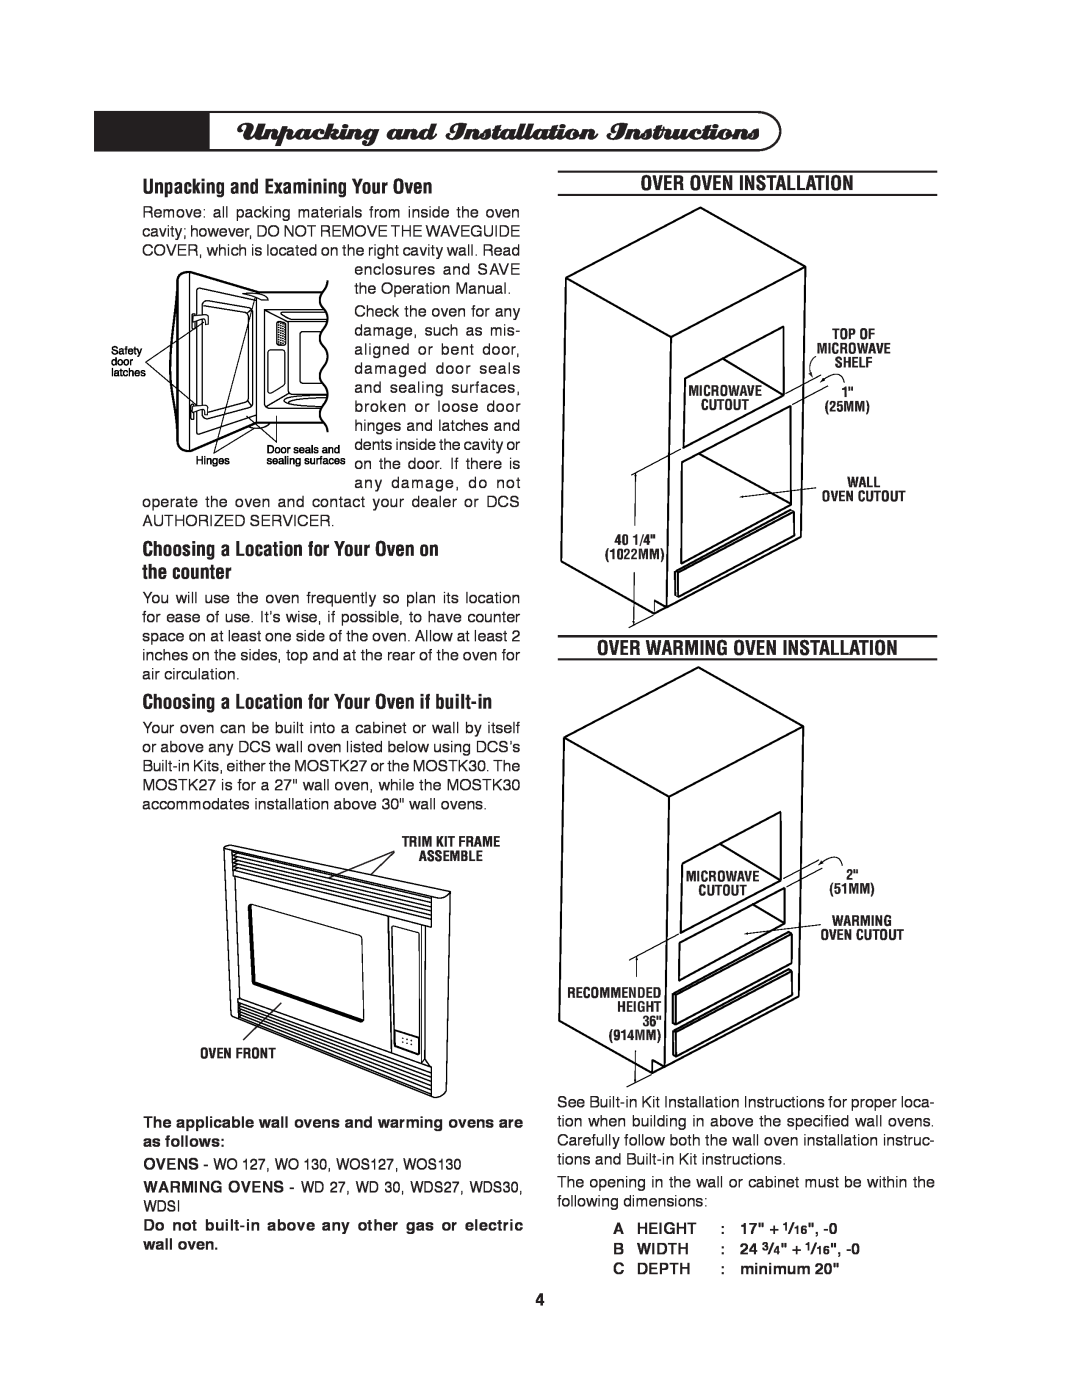 DCS MO-24SS manual Unpacking and Installation Instructions, Unpacking and Examining Your Oven, Over Oven Installation 